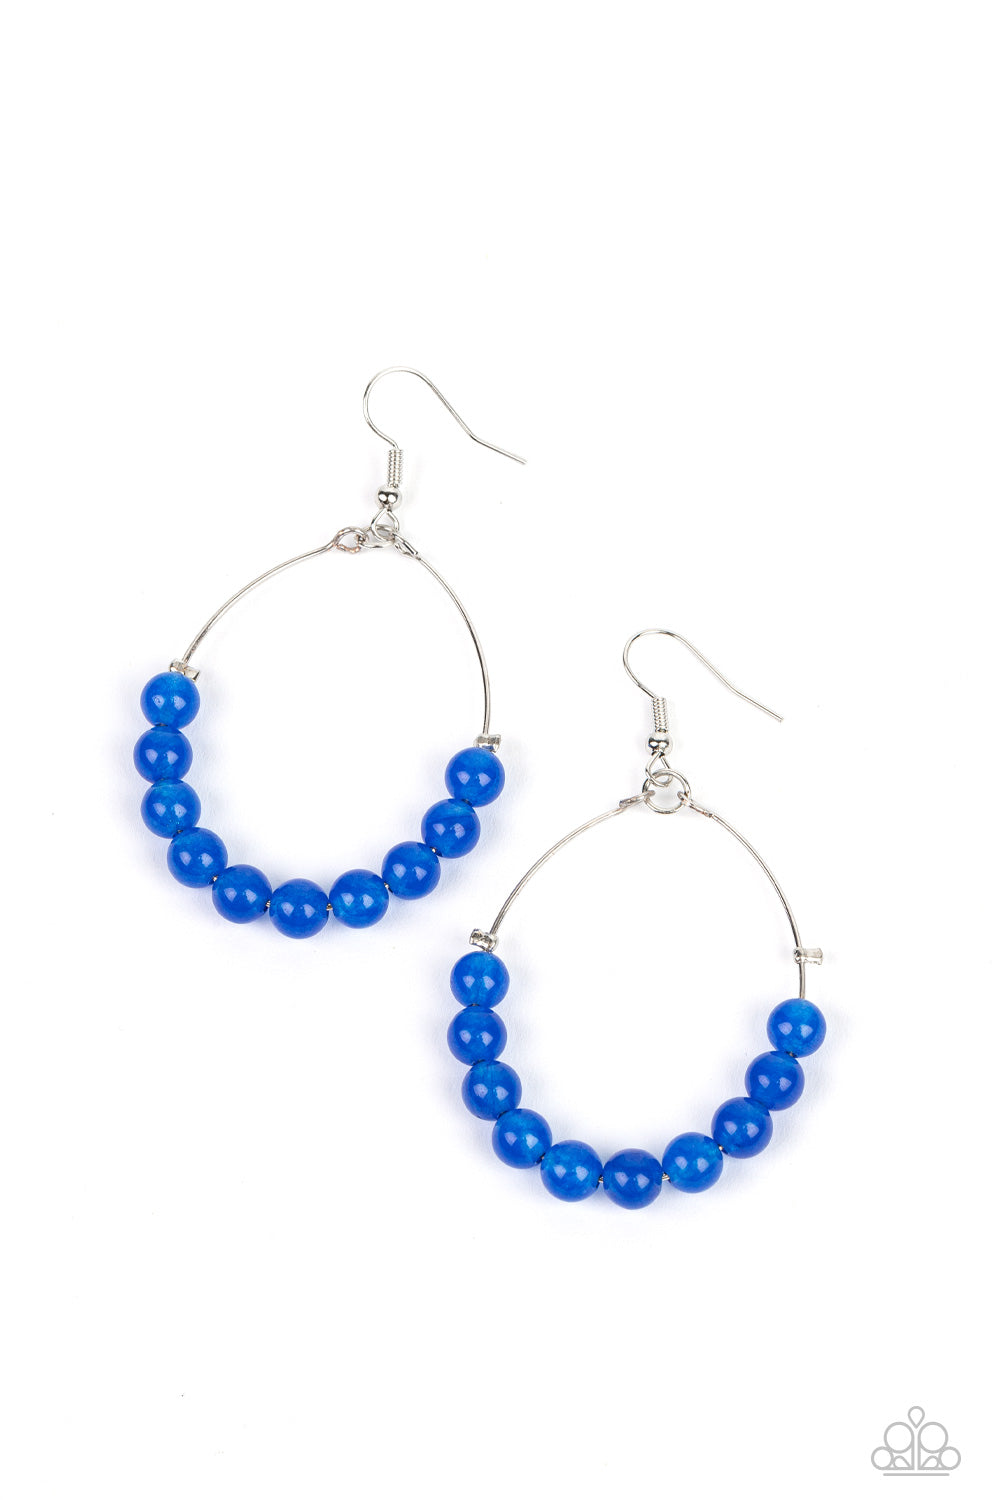 Catch a Breeze Blue Earring - Paparazzi Accessories  Blue stones are threaded along dangling silver hoops, evoking a trendy laidback design. Earring attaches to a standard fishhook fitting.  Sold as one pair of earrings.